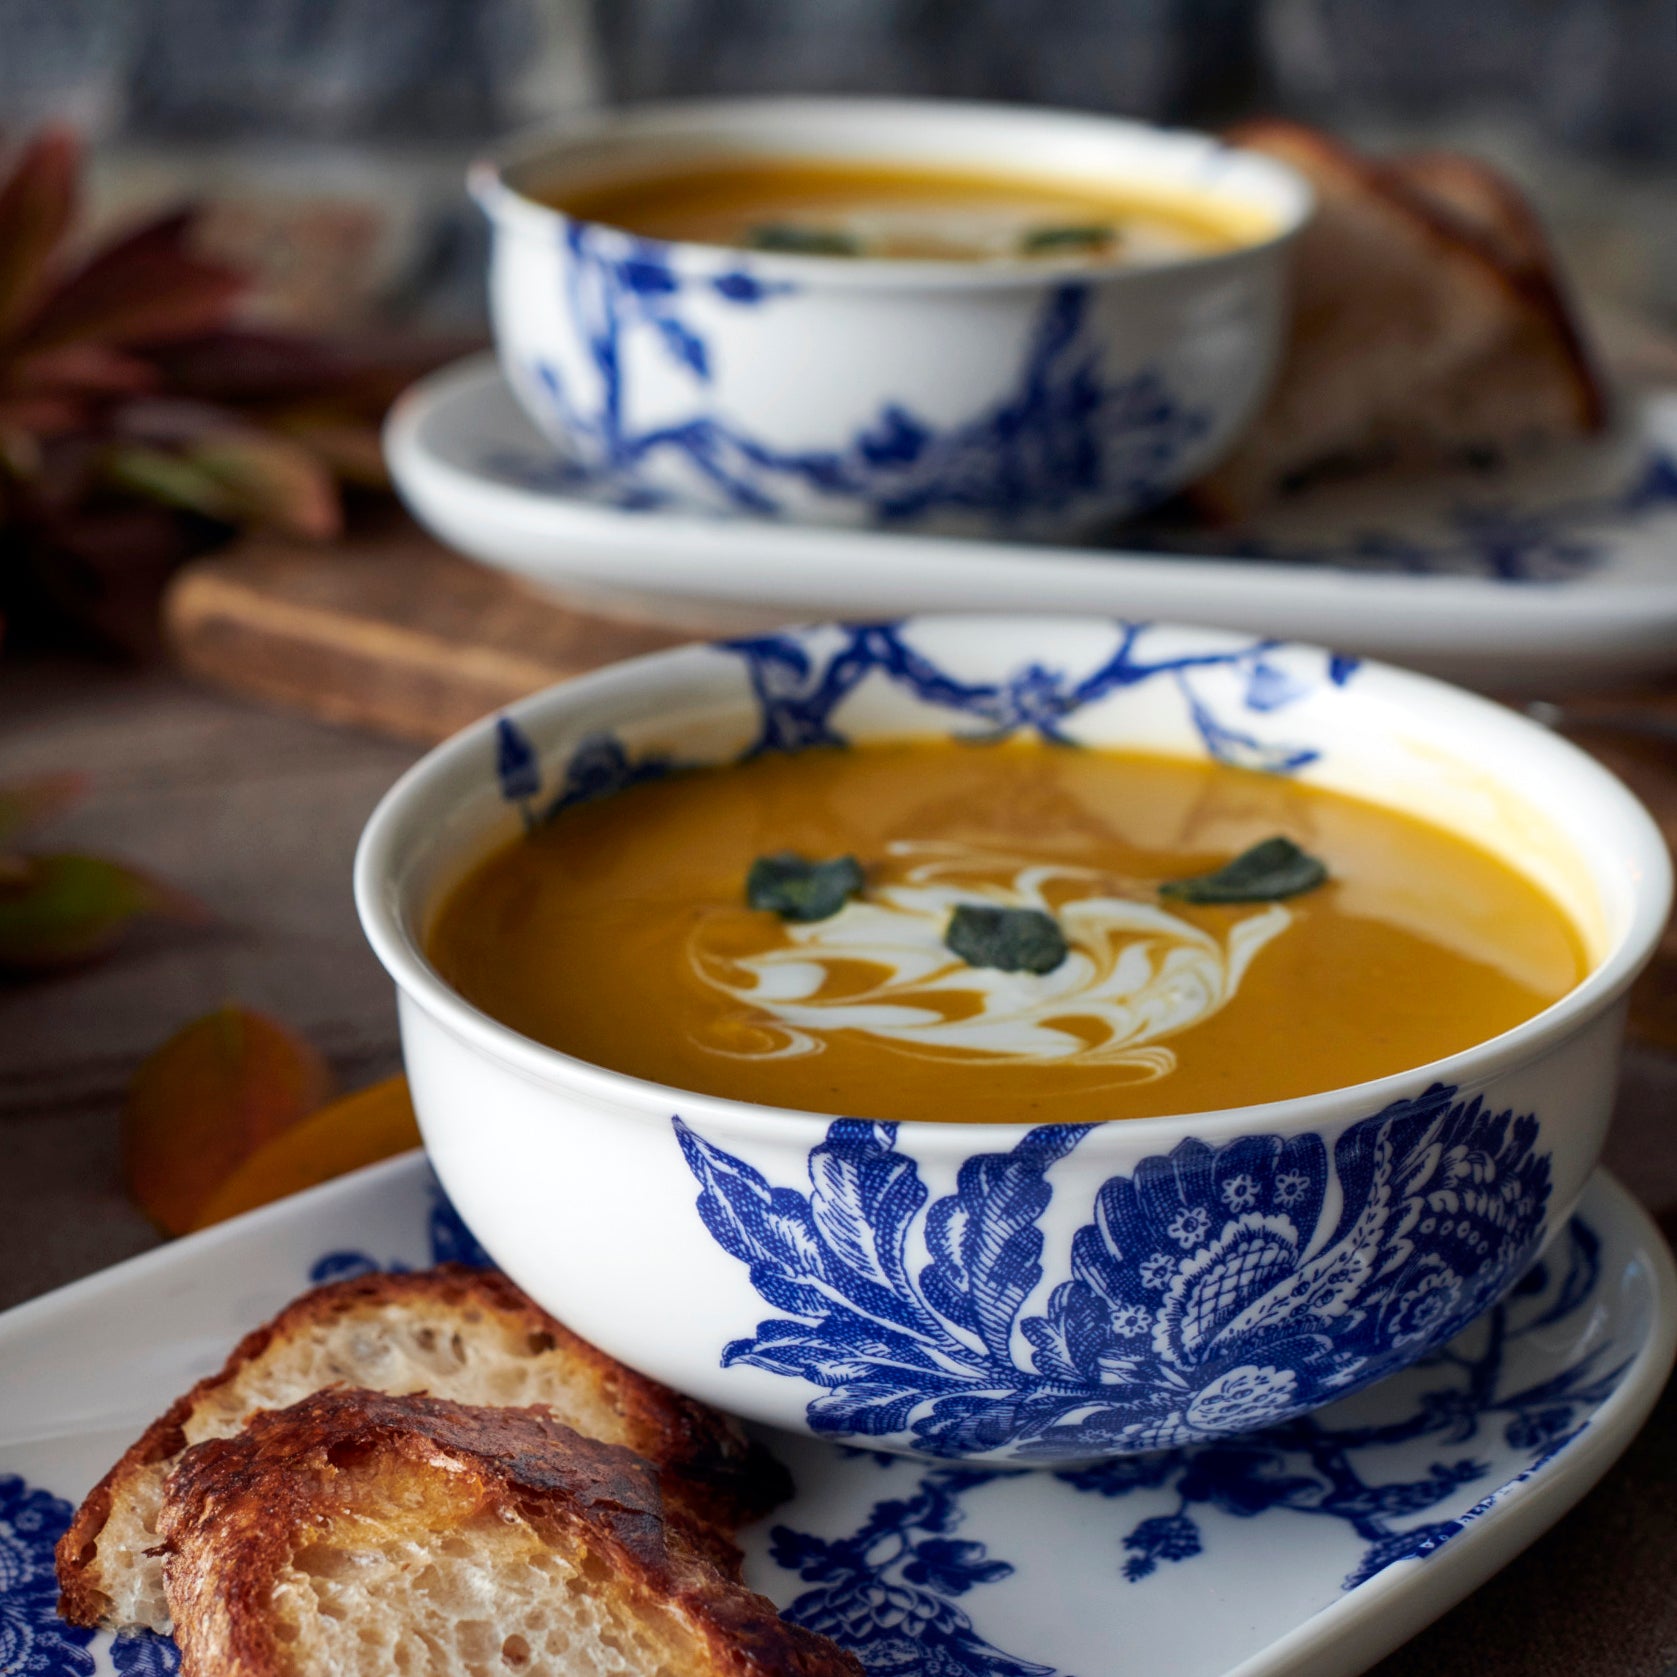 Two bowls of pumpkin soup served with slices of toasted bread.